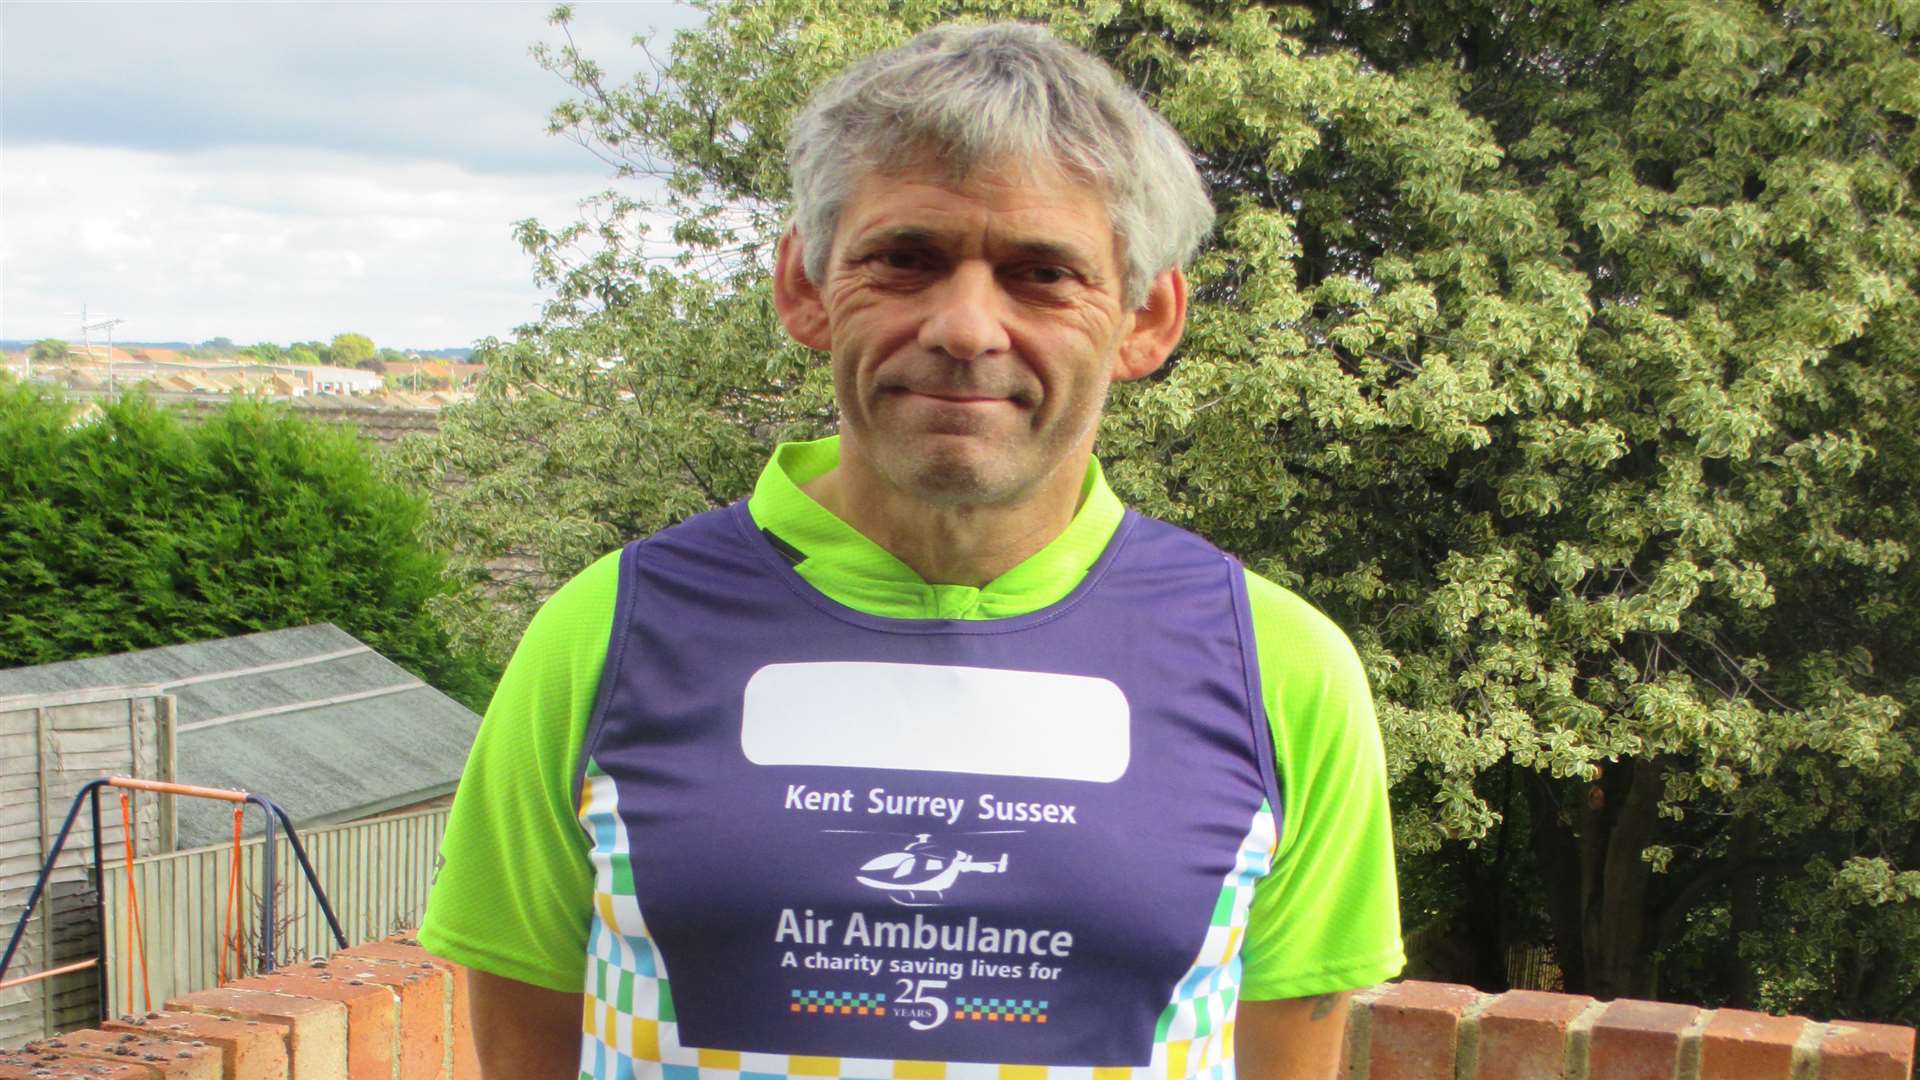 Peter Goatham will ride 210 miles in 24 hours on September 26